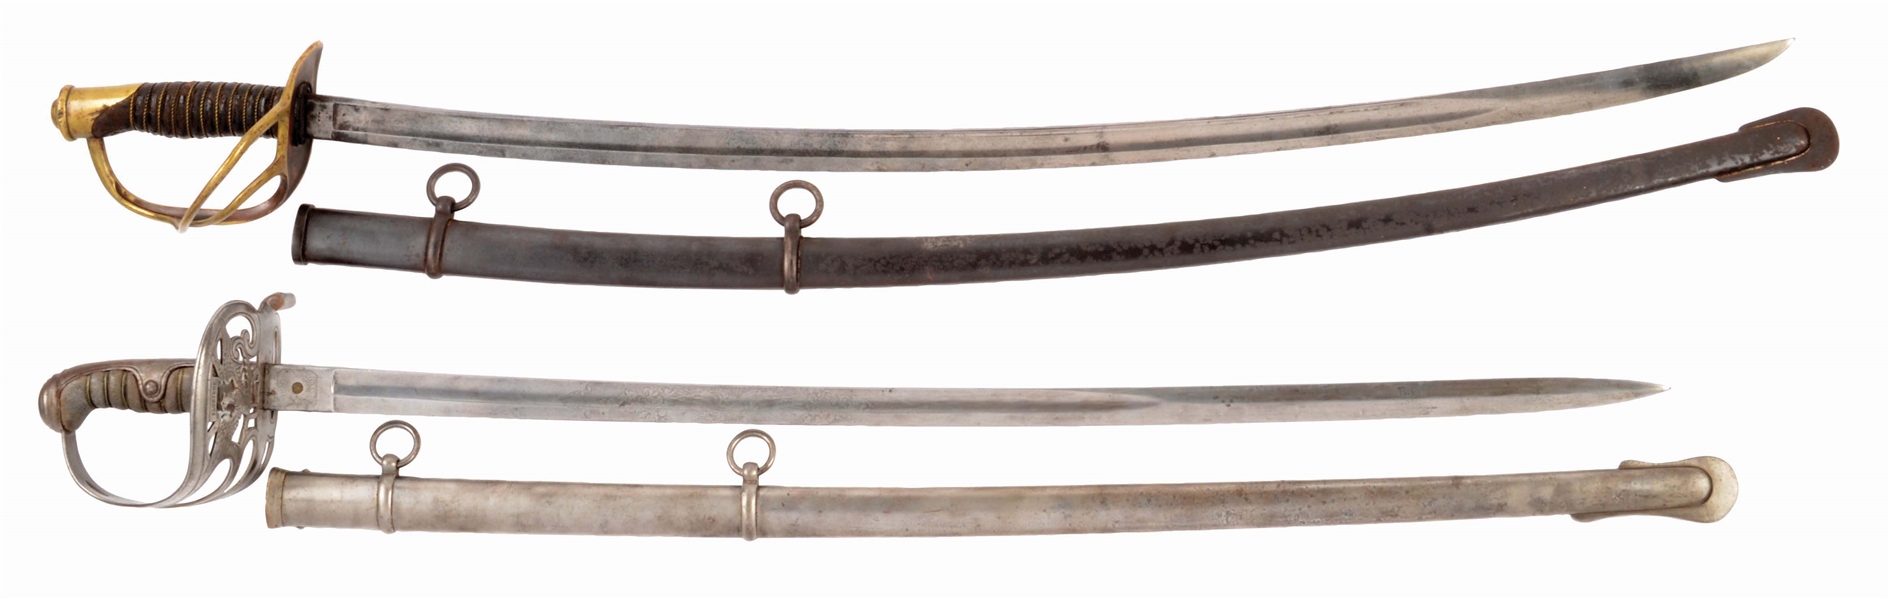 LOT OF 2: SWORDS 1860 AMES CAVALRY SABER AND HORSTMANN P-75.